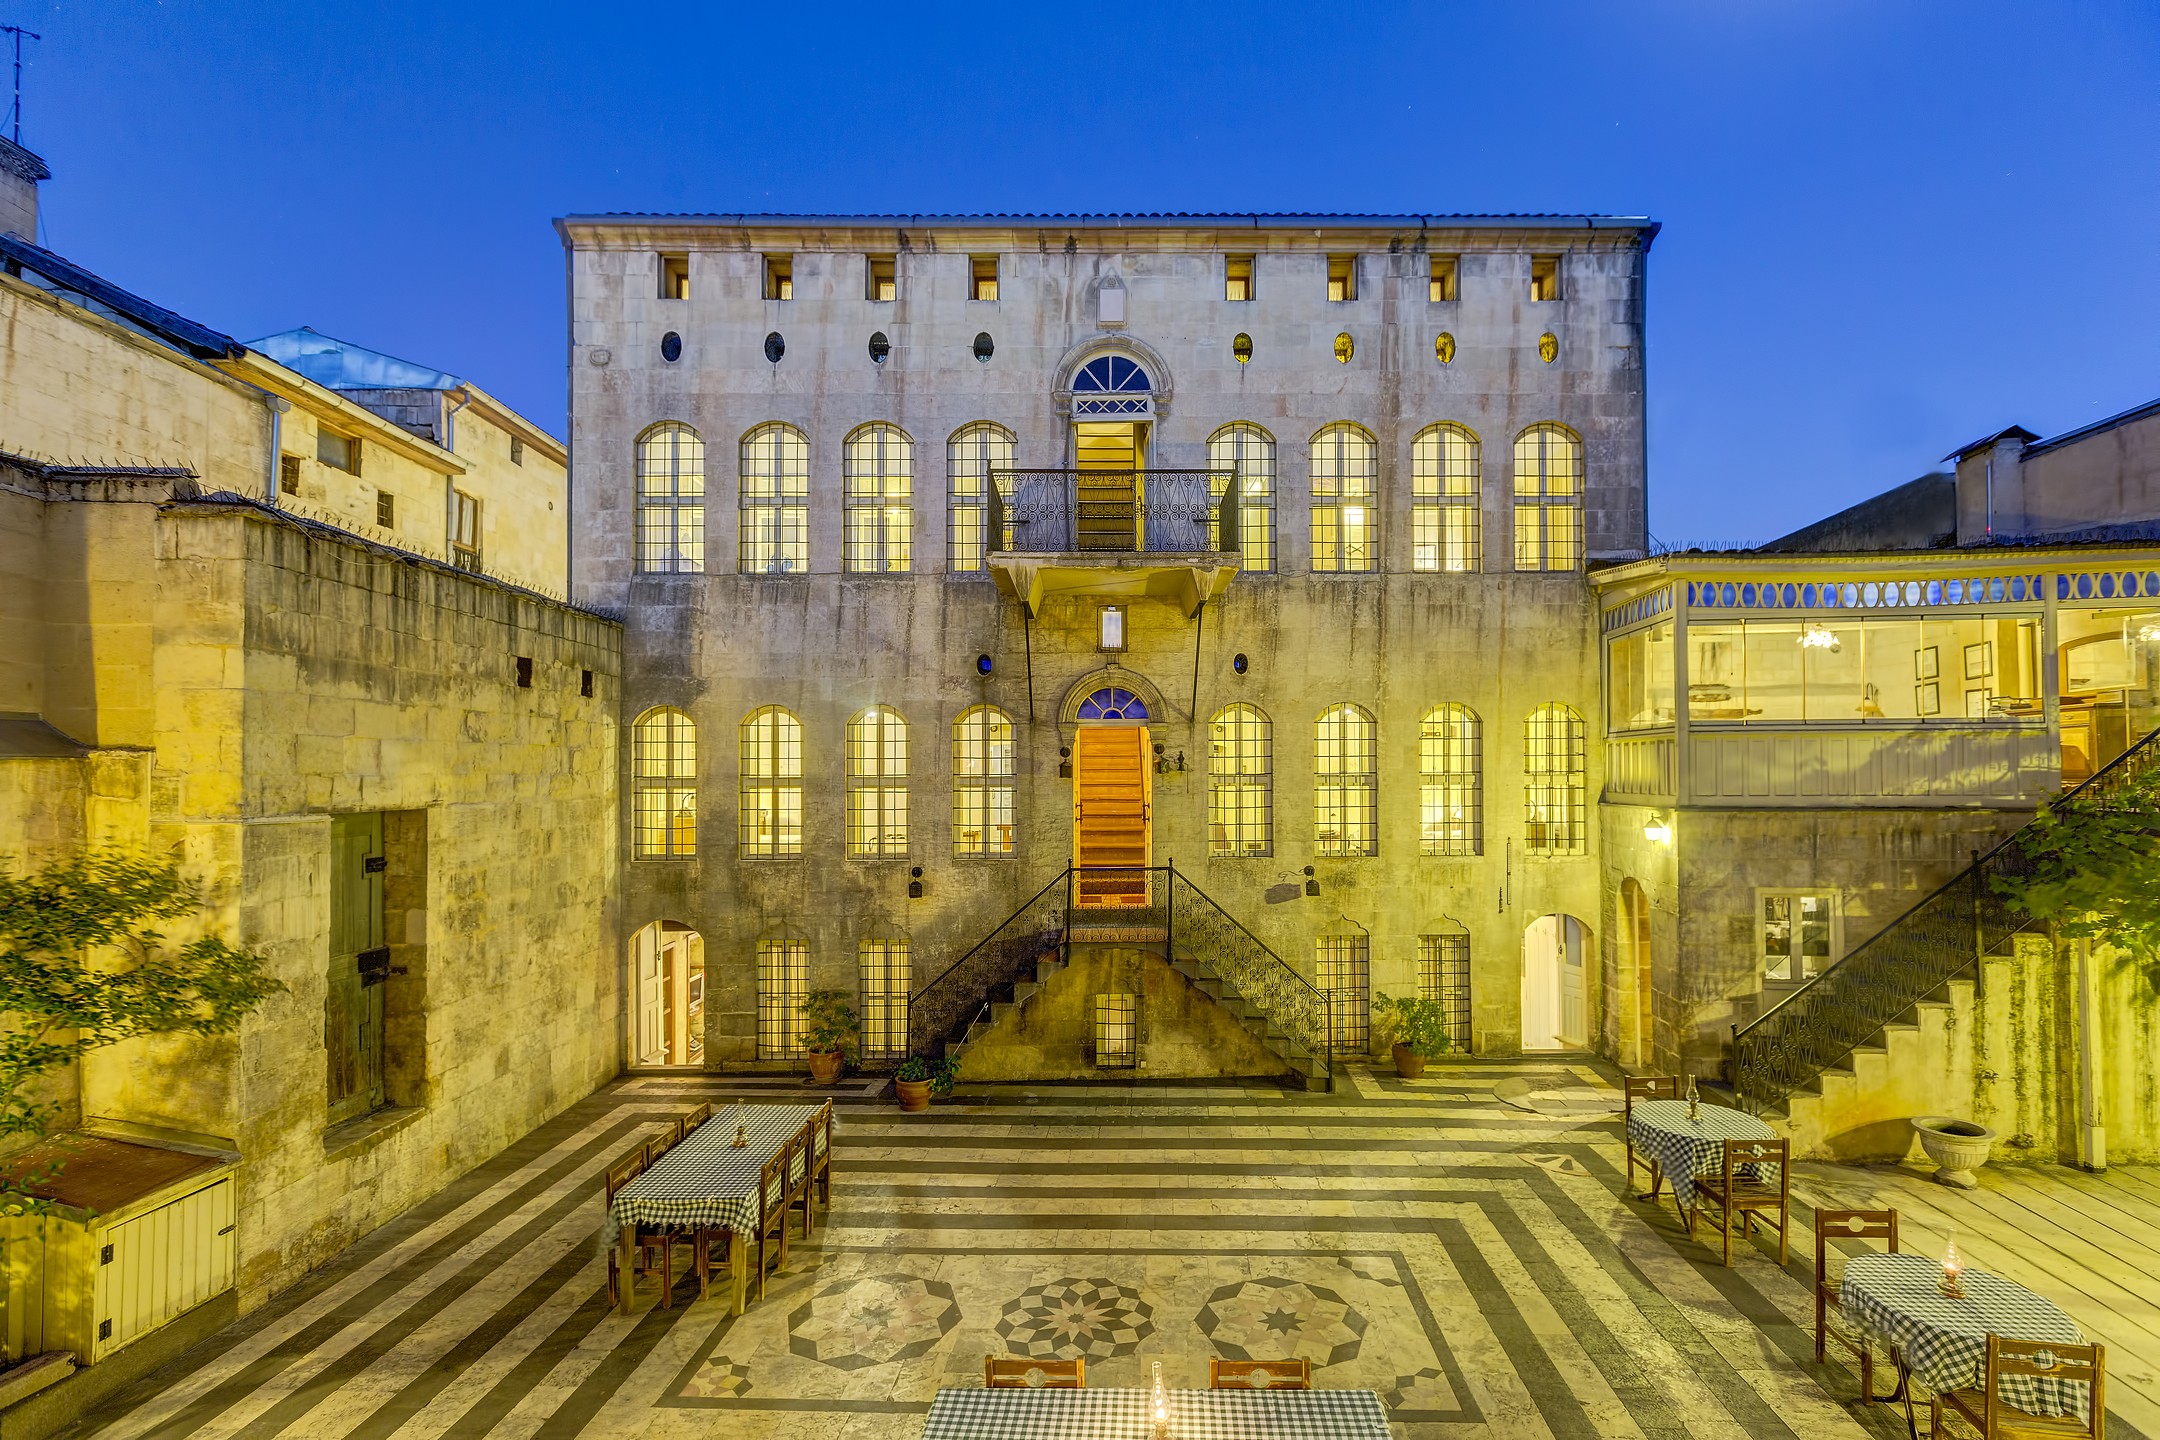 Gaziantep Travel Guide : Houses and traditional architecture